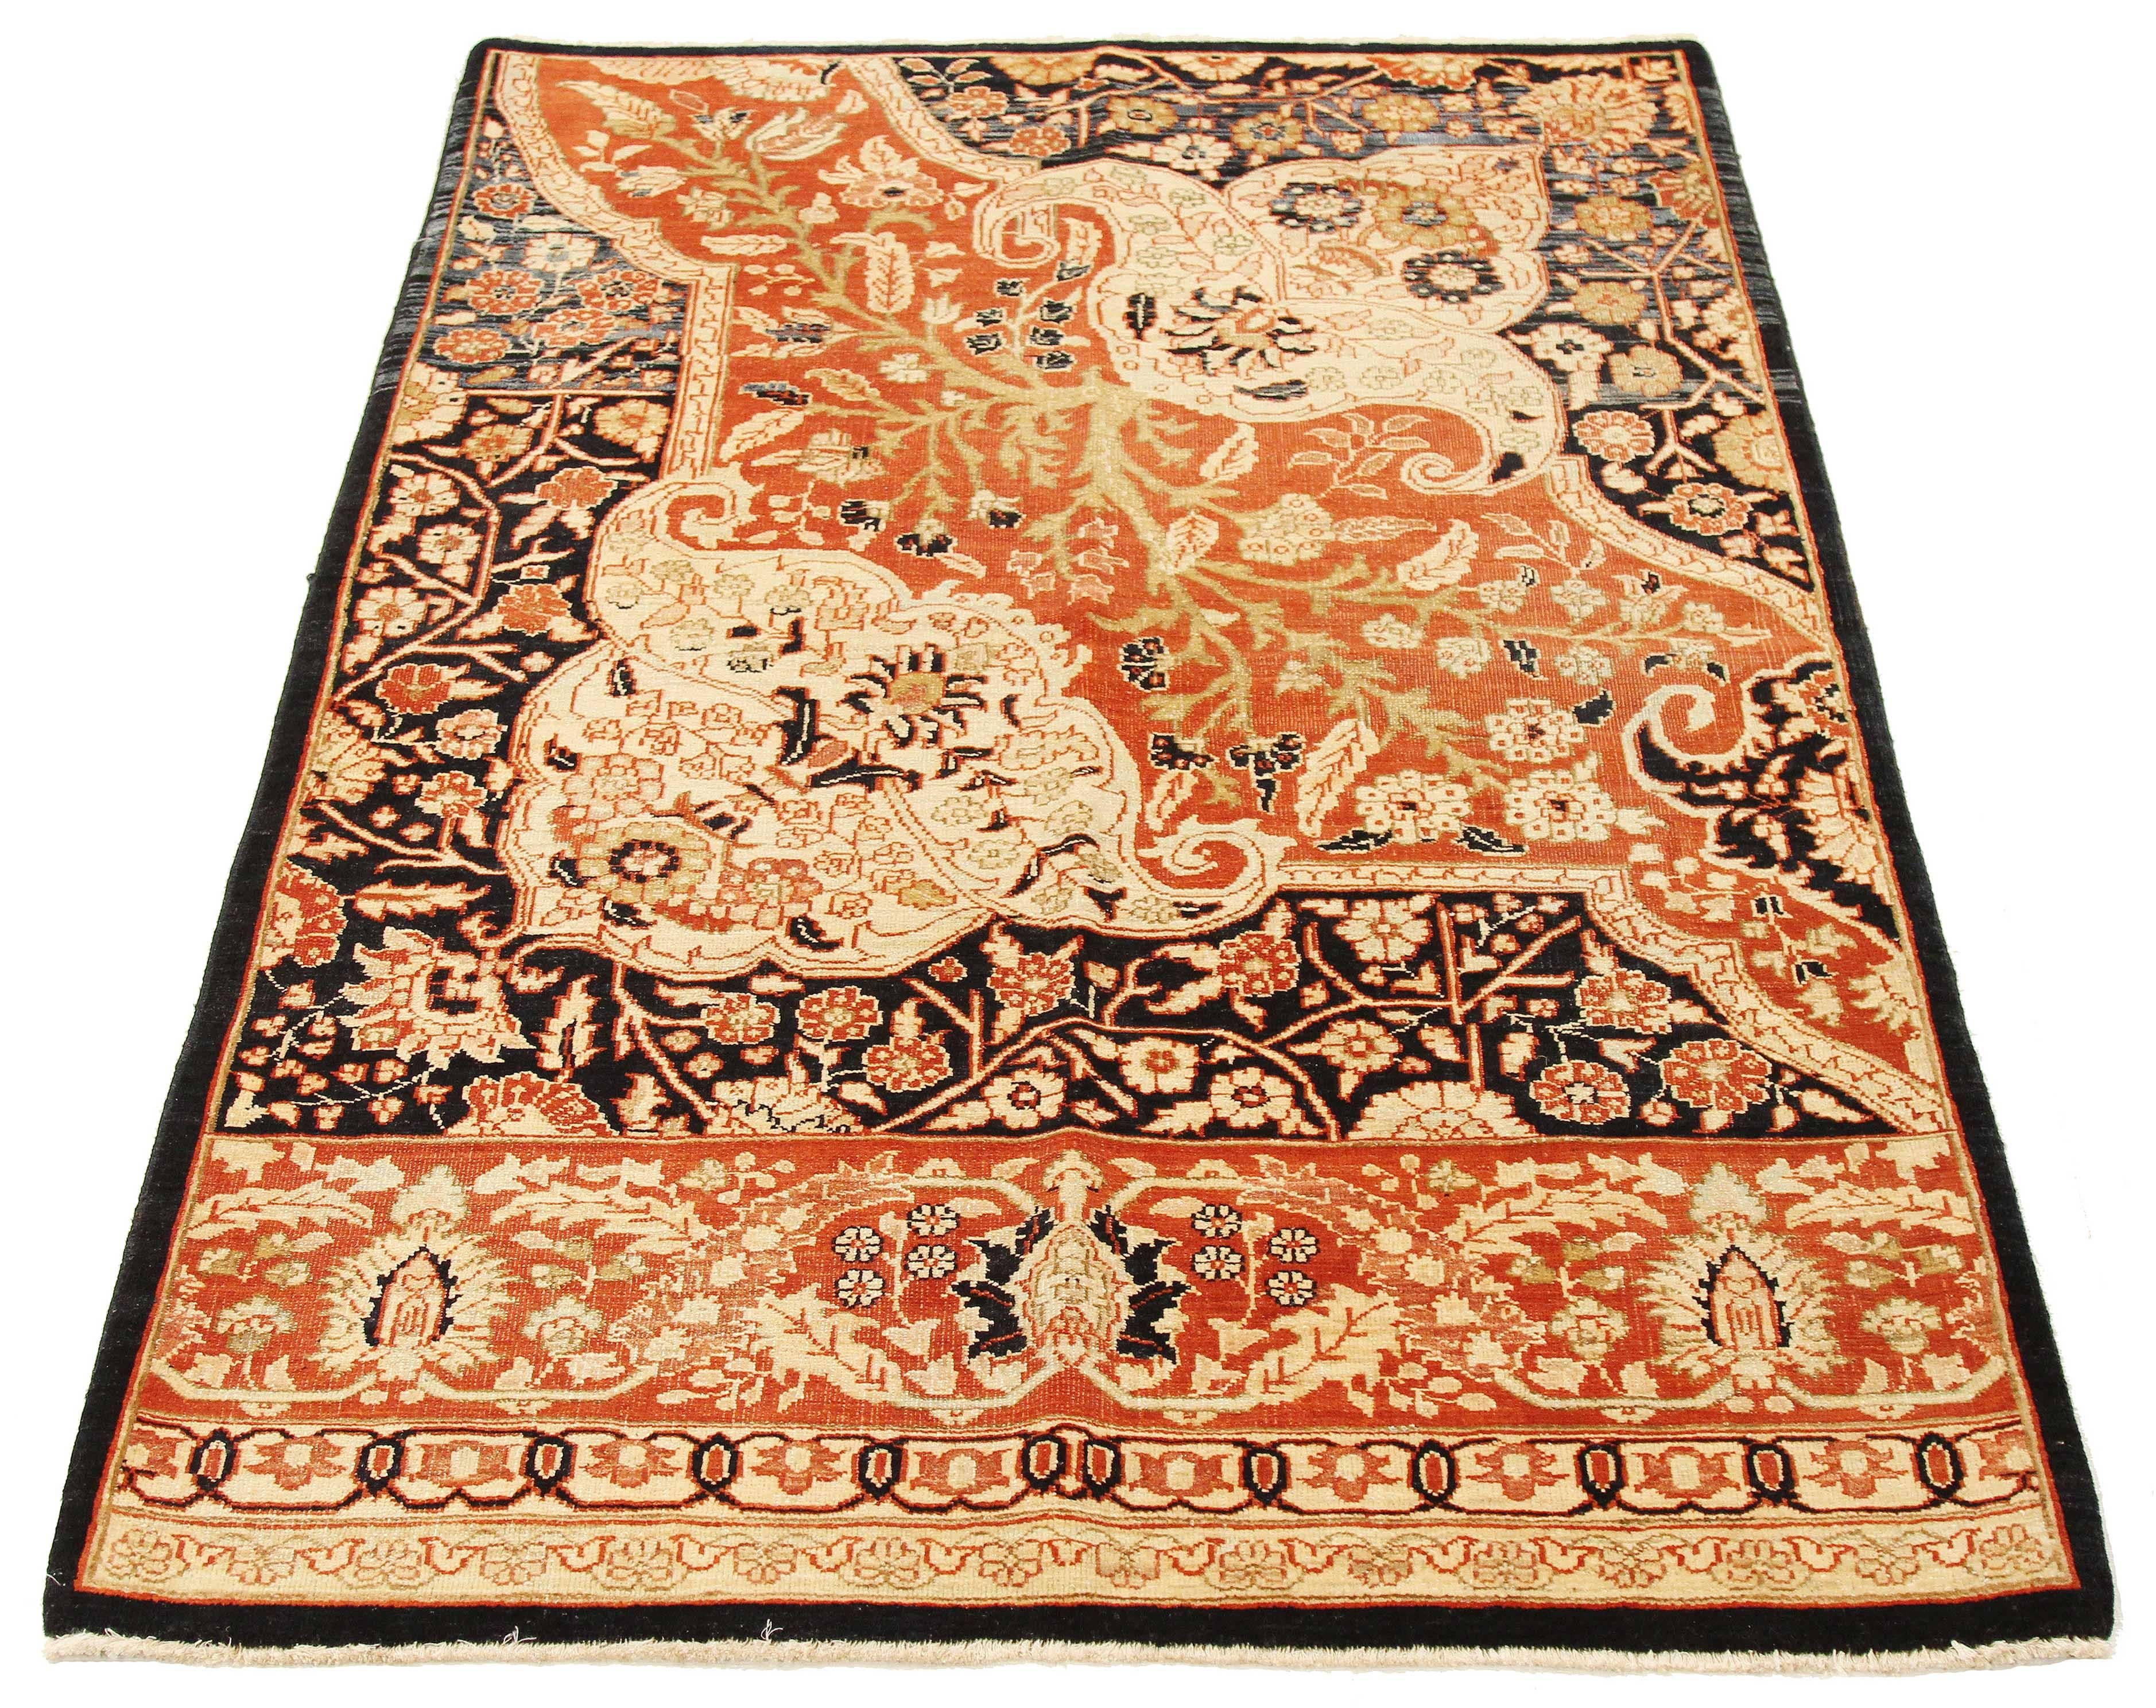 Contemporary Turkish rug handwoven from the finest sheep’s wool and colored with all-natural vegetable dyes that are safe for humans and pets. It’s styled after traditional Farahan weaving featuring a lovely ensemble of floral designs in black and